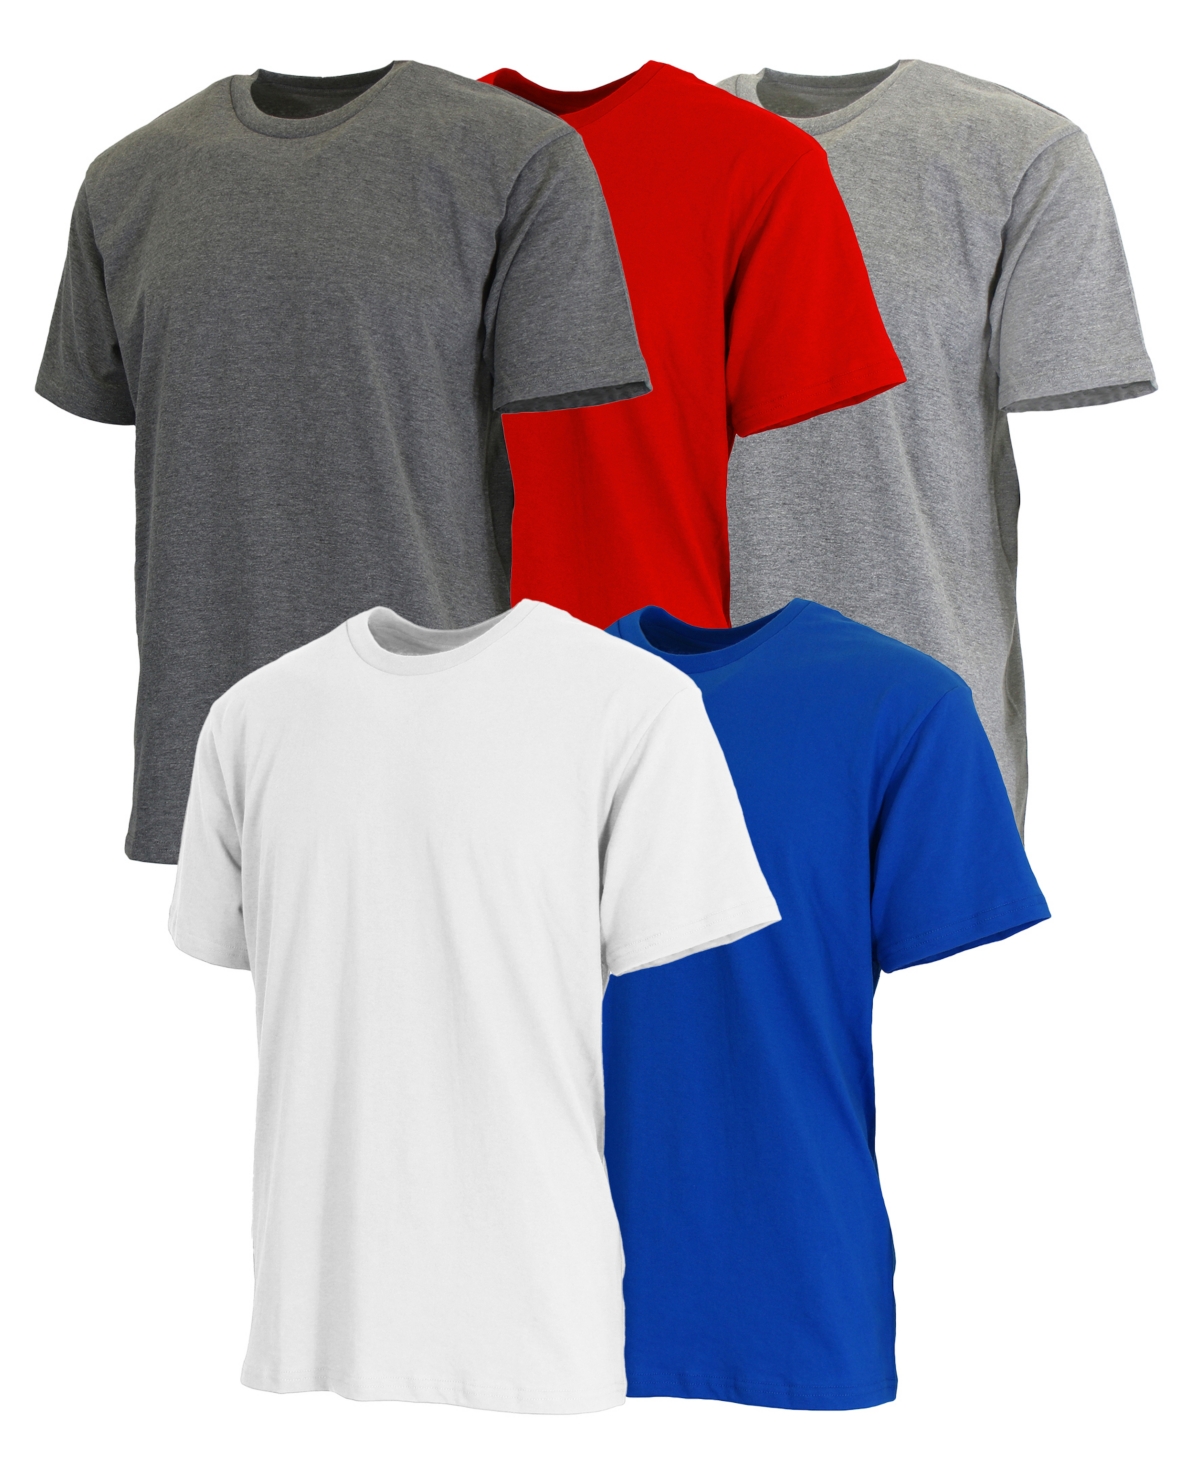 Men's Short Sleeve Crew Neck Tee-5 Pack - Red-Navy-Heather Grey-White-Royal